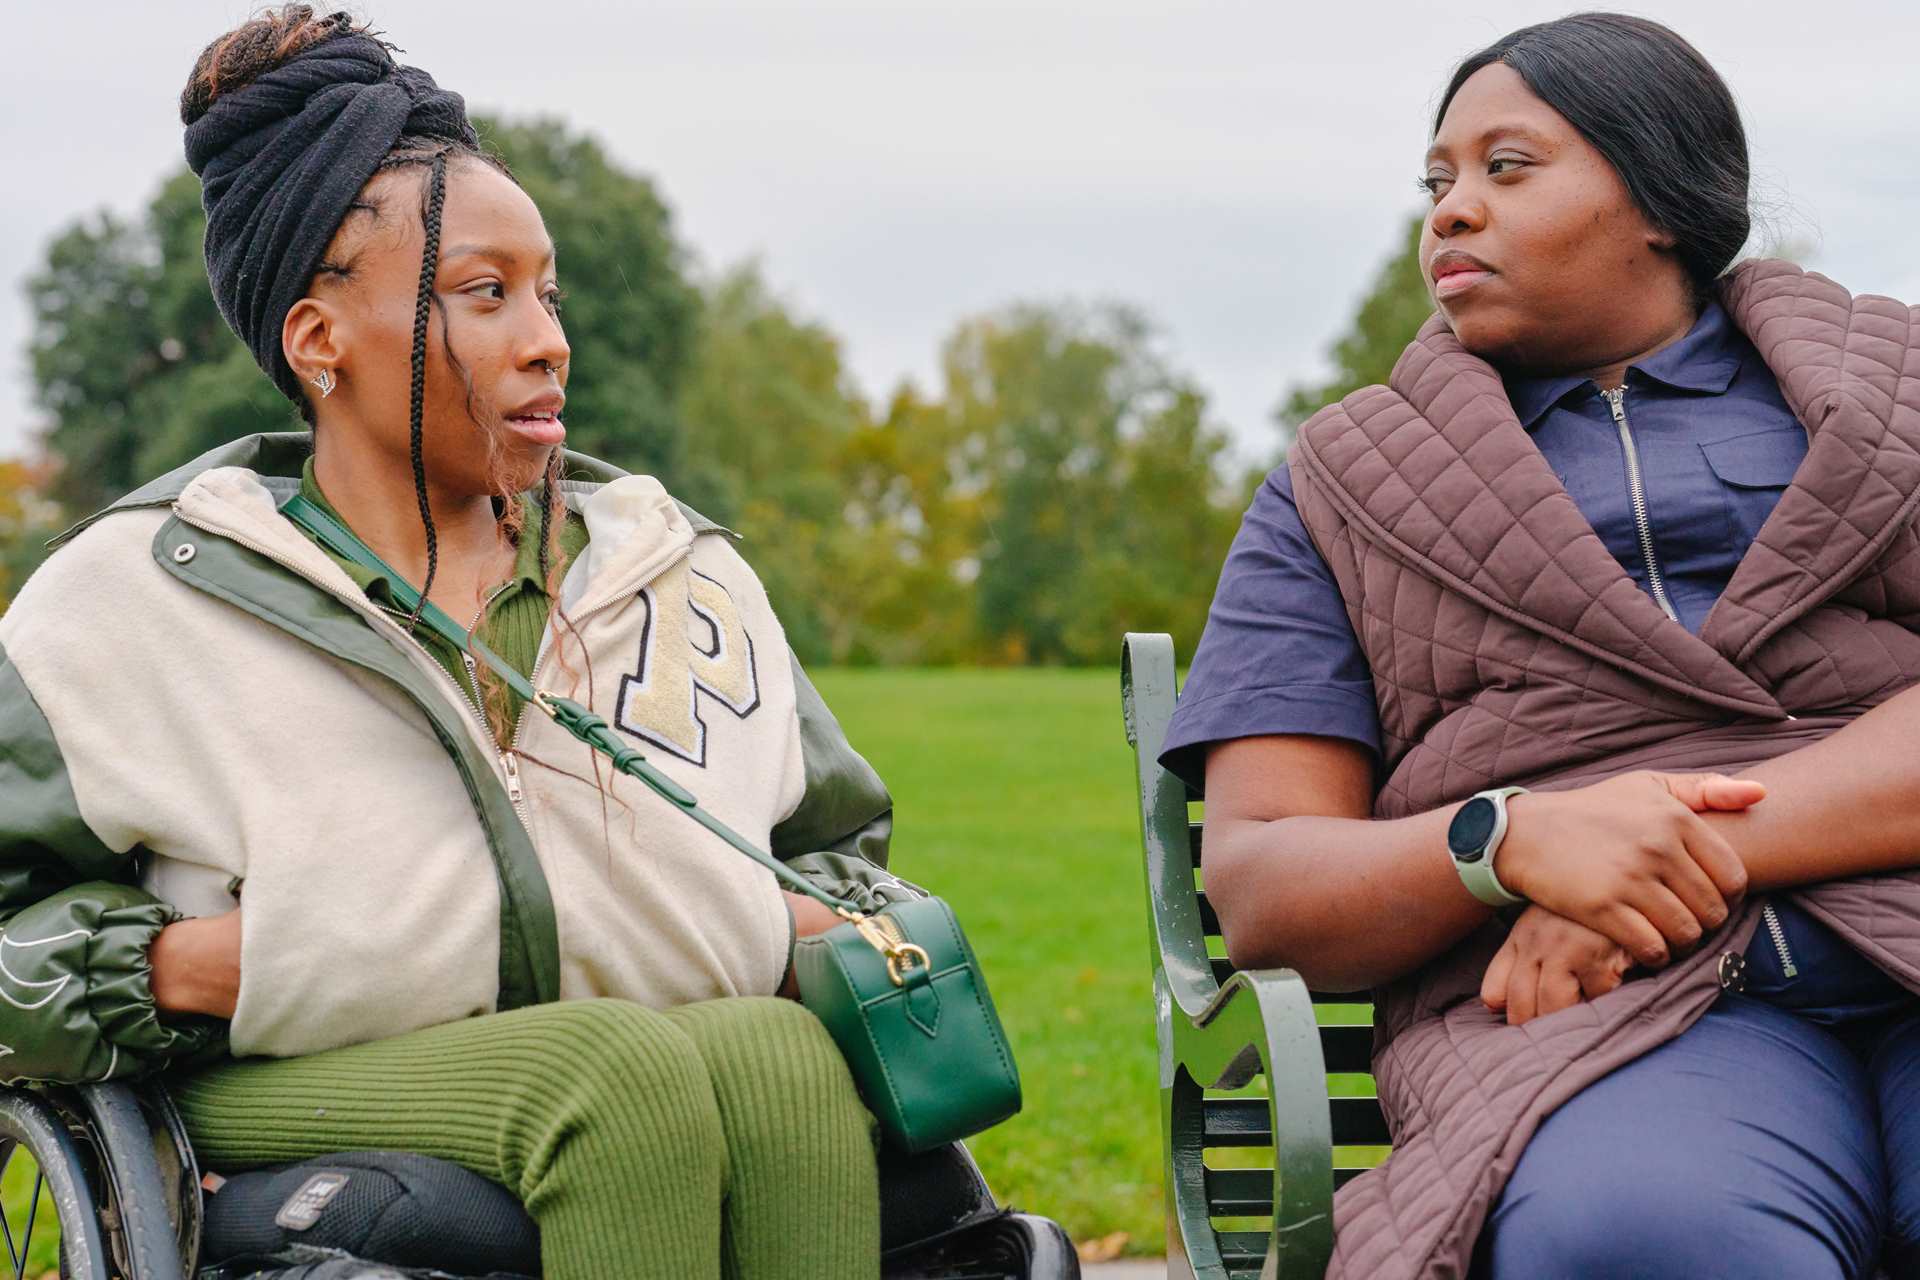 A young Black woman in a wheelchair and an older Black woman sitting on a bench in the park. They are talking about something serious.